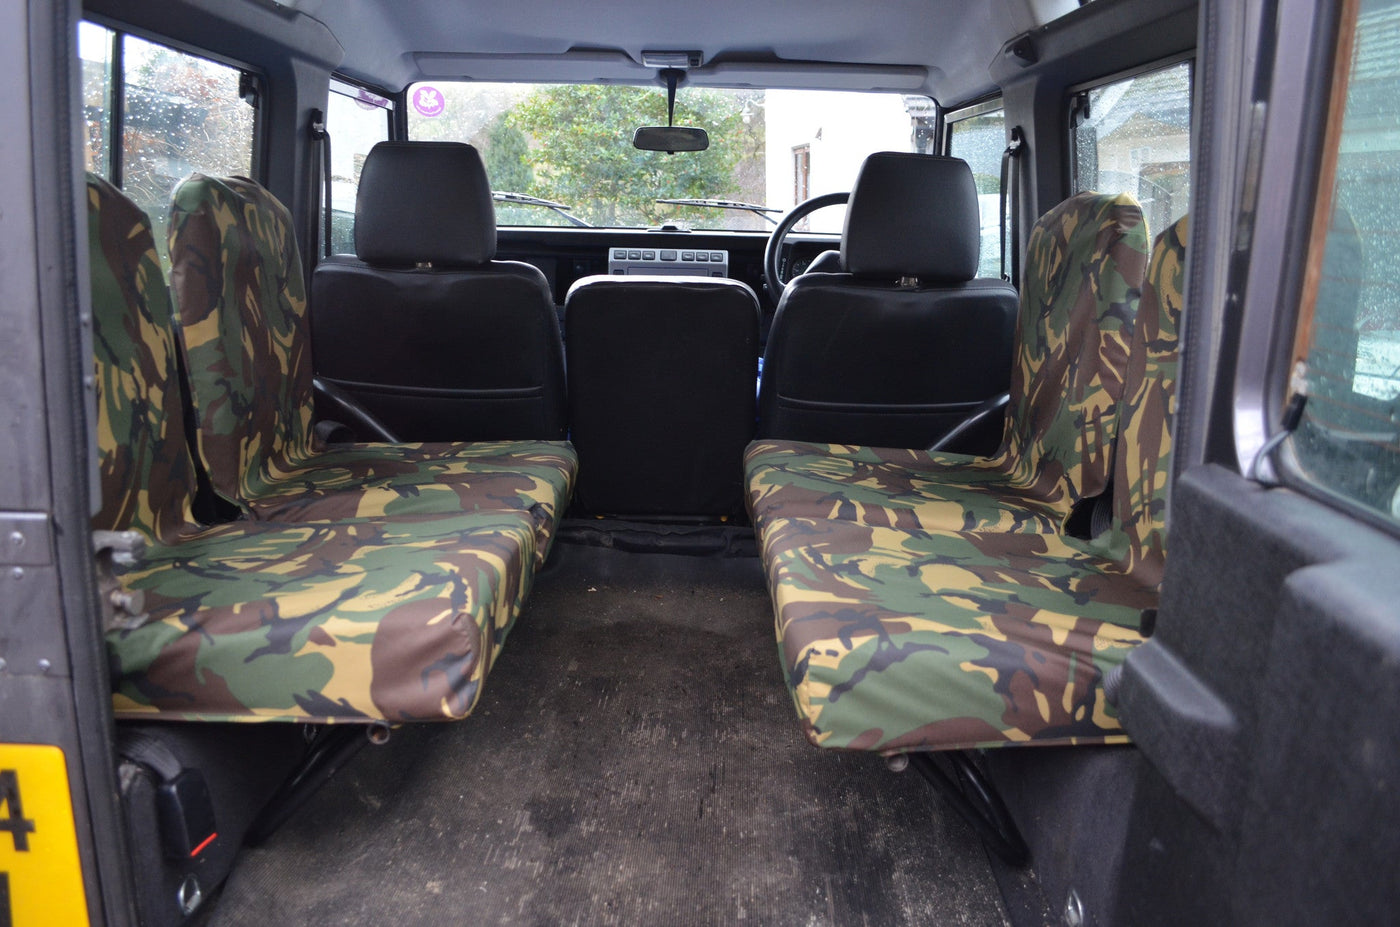 Land Rover Defender 1983 - 2007 Rear Seat Covers Set of 4 Dicky Seats / Green Camouflage Scutes Ltd